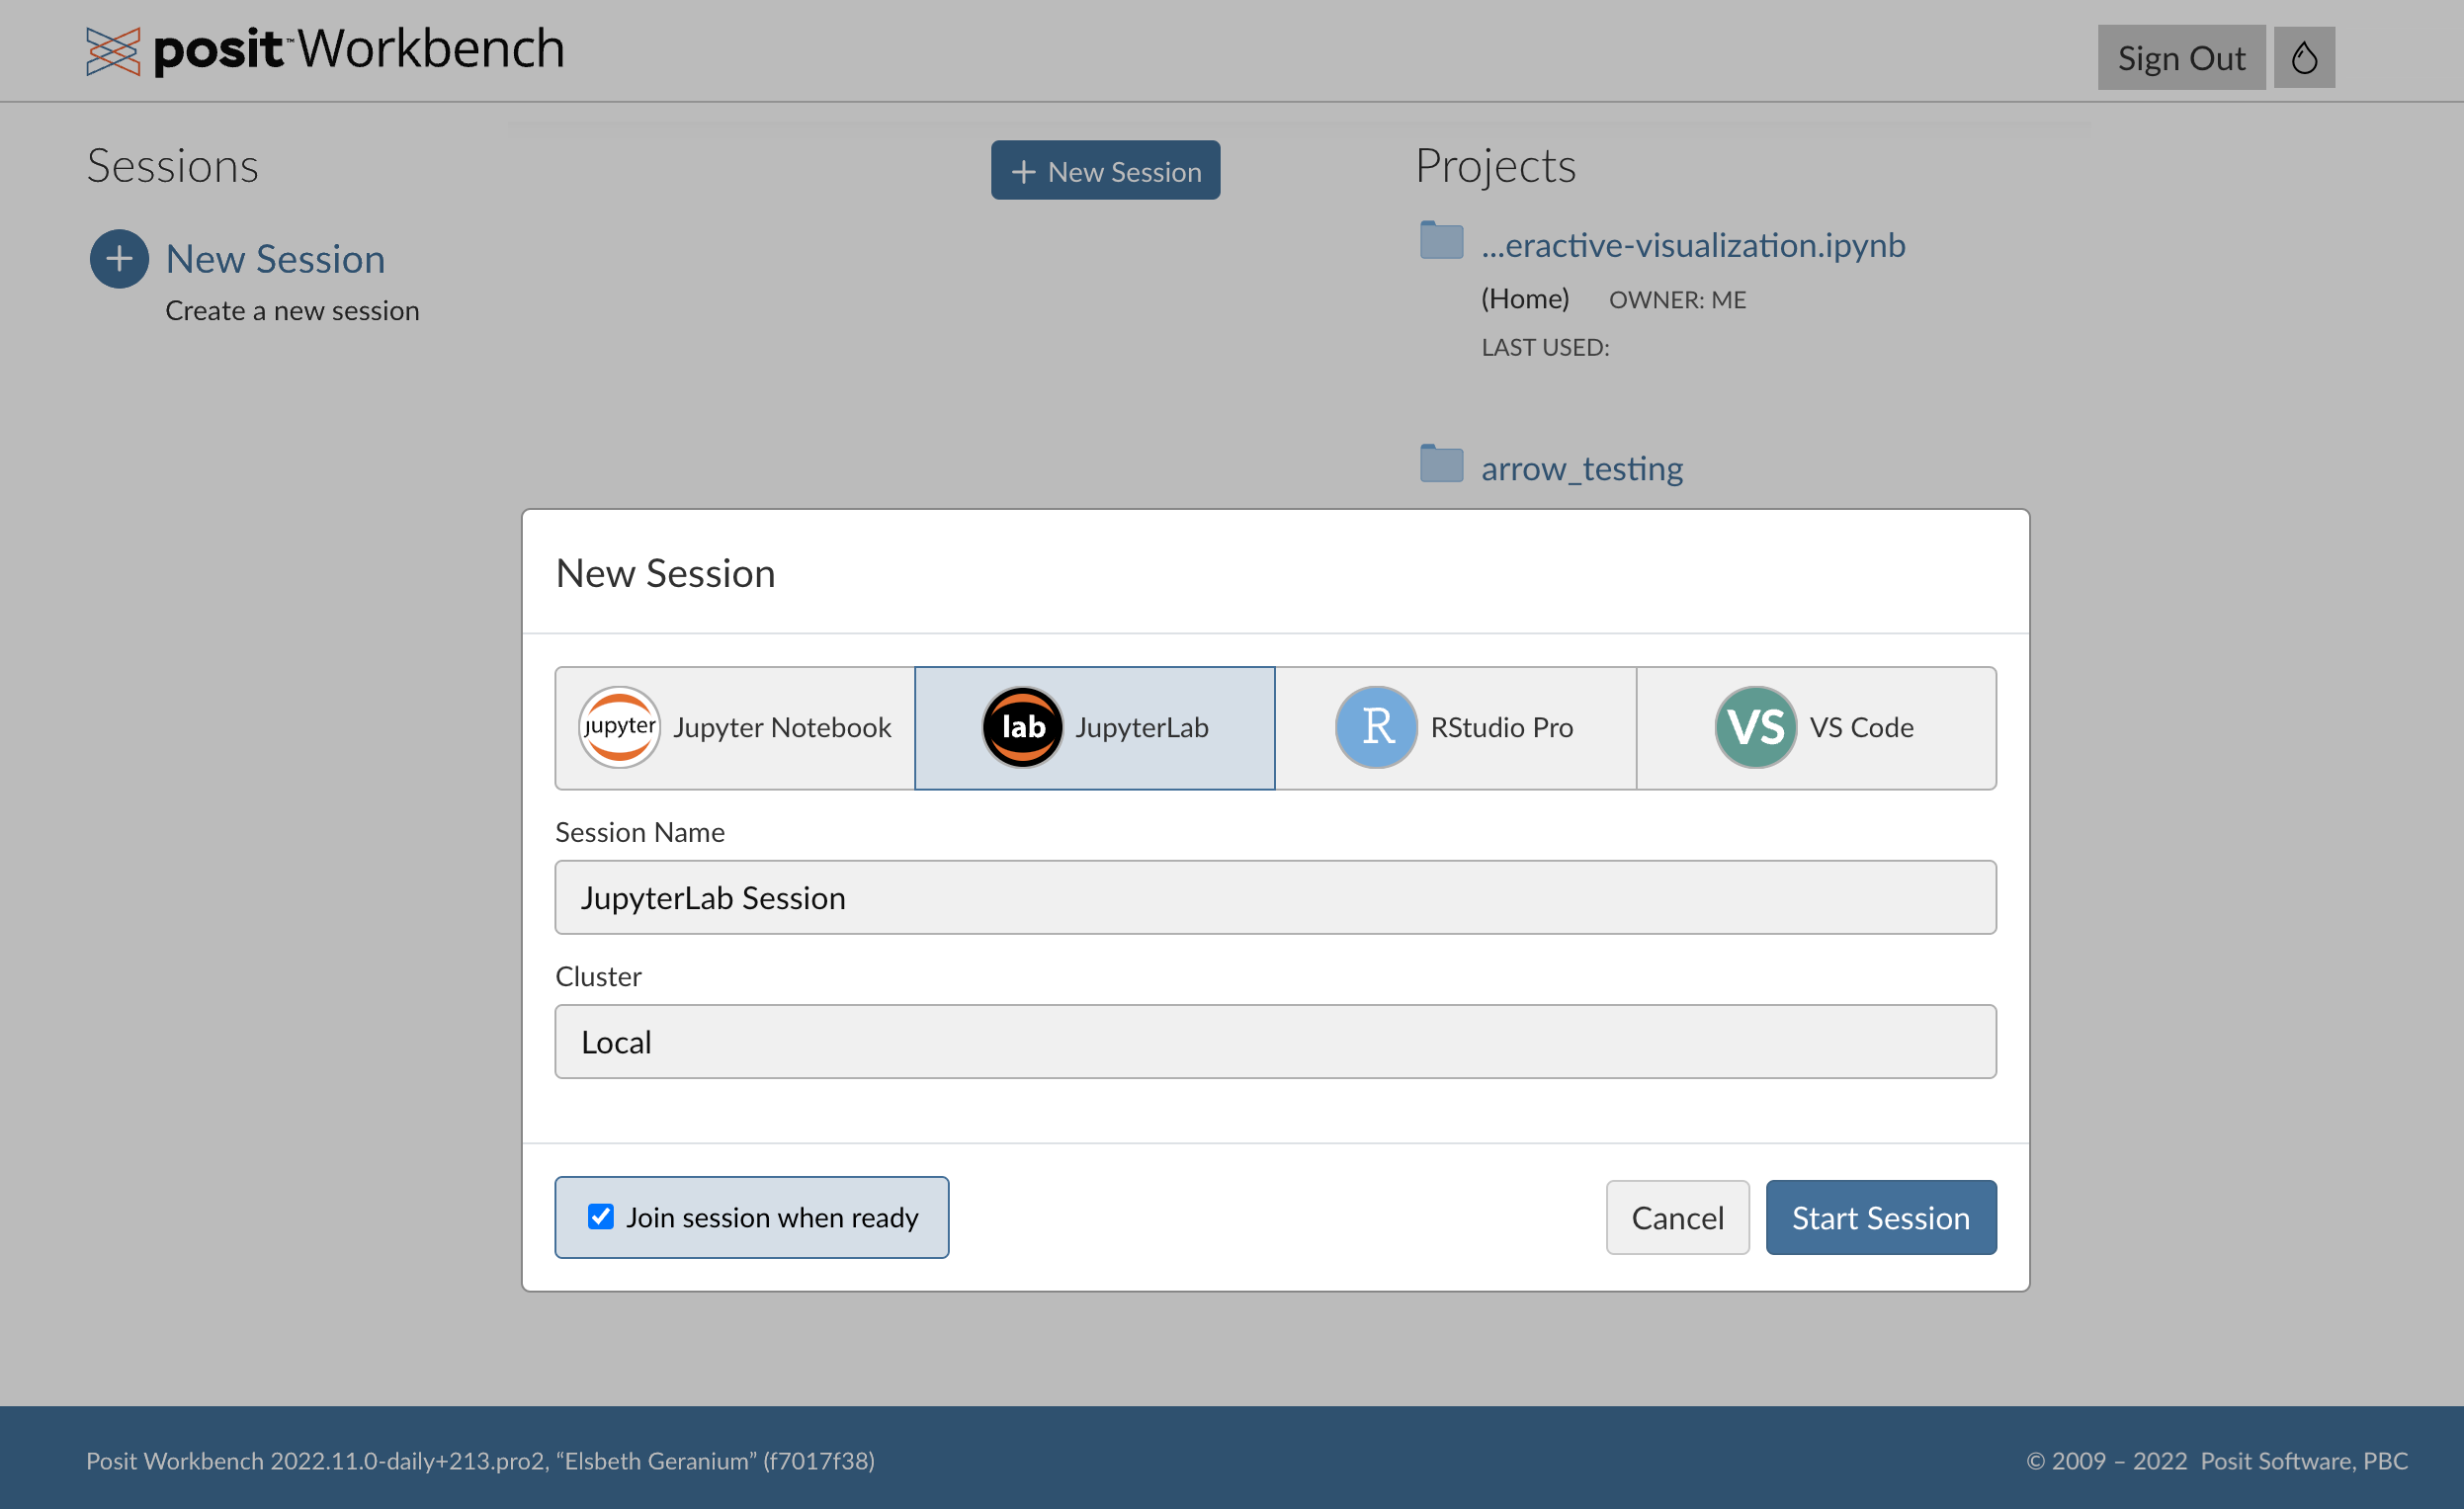 Screenshot of starting a new JupyterLab session from the Posit Workbench home page.